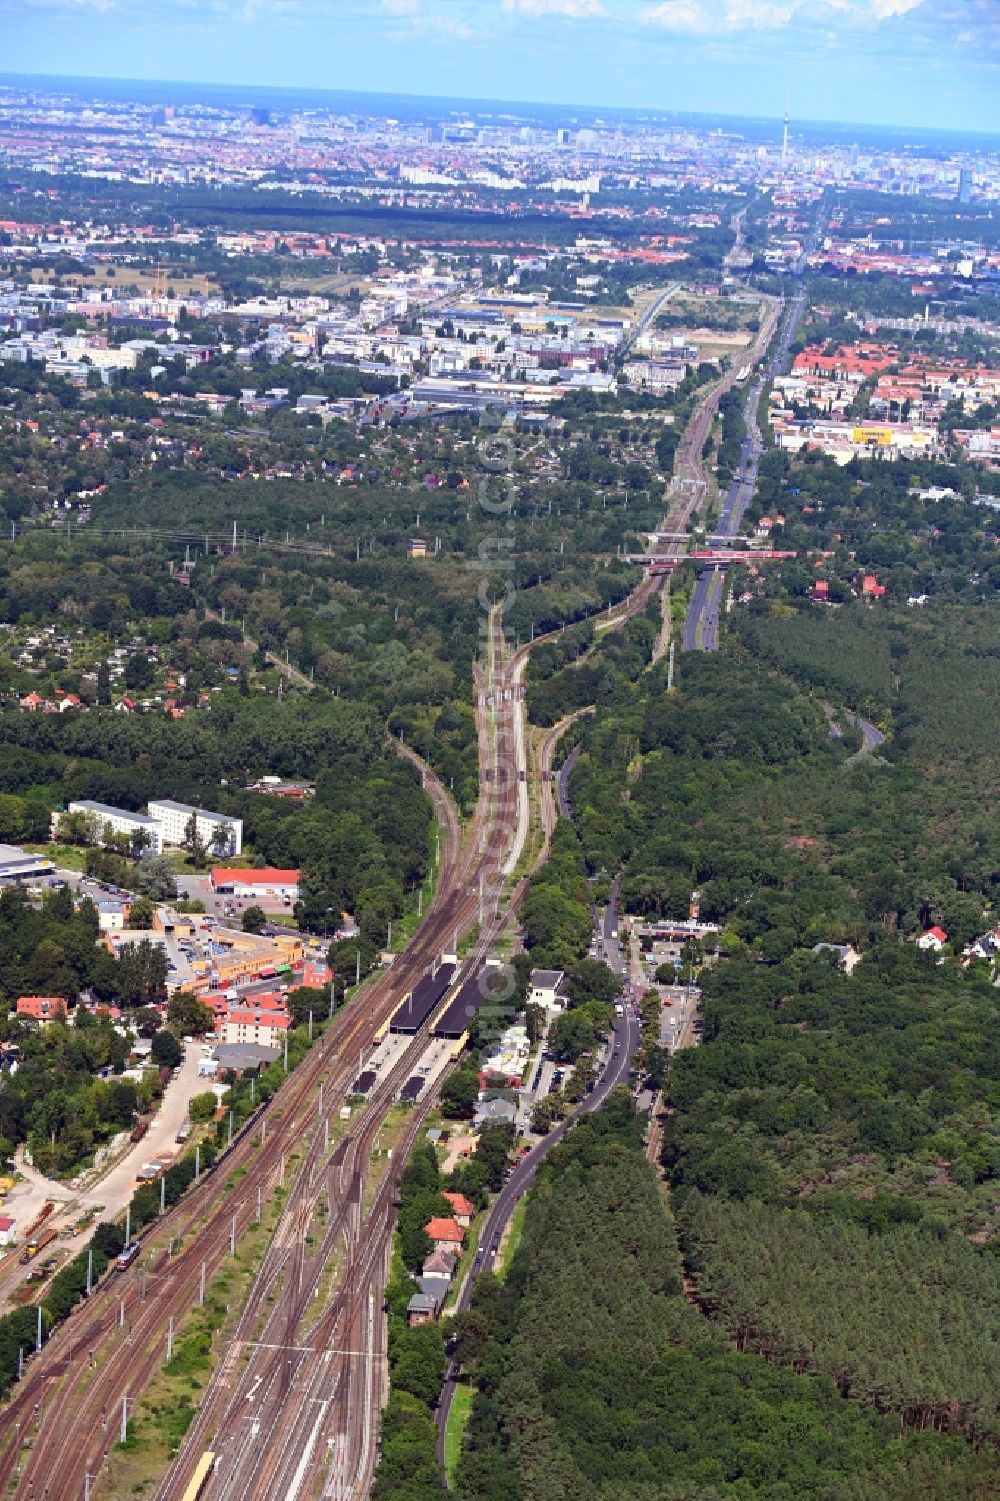 Aerial photograph Berlin - Station building and track systems of the S-Bahn station in the district Gruenau in Berlin, Germany